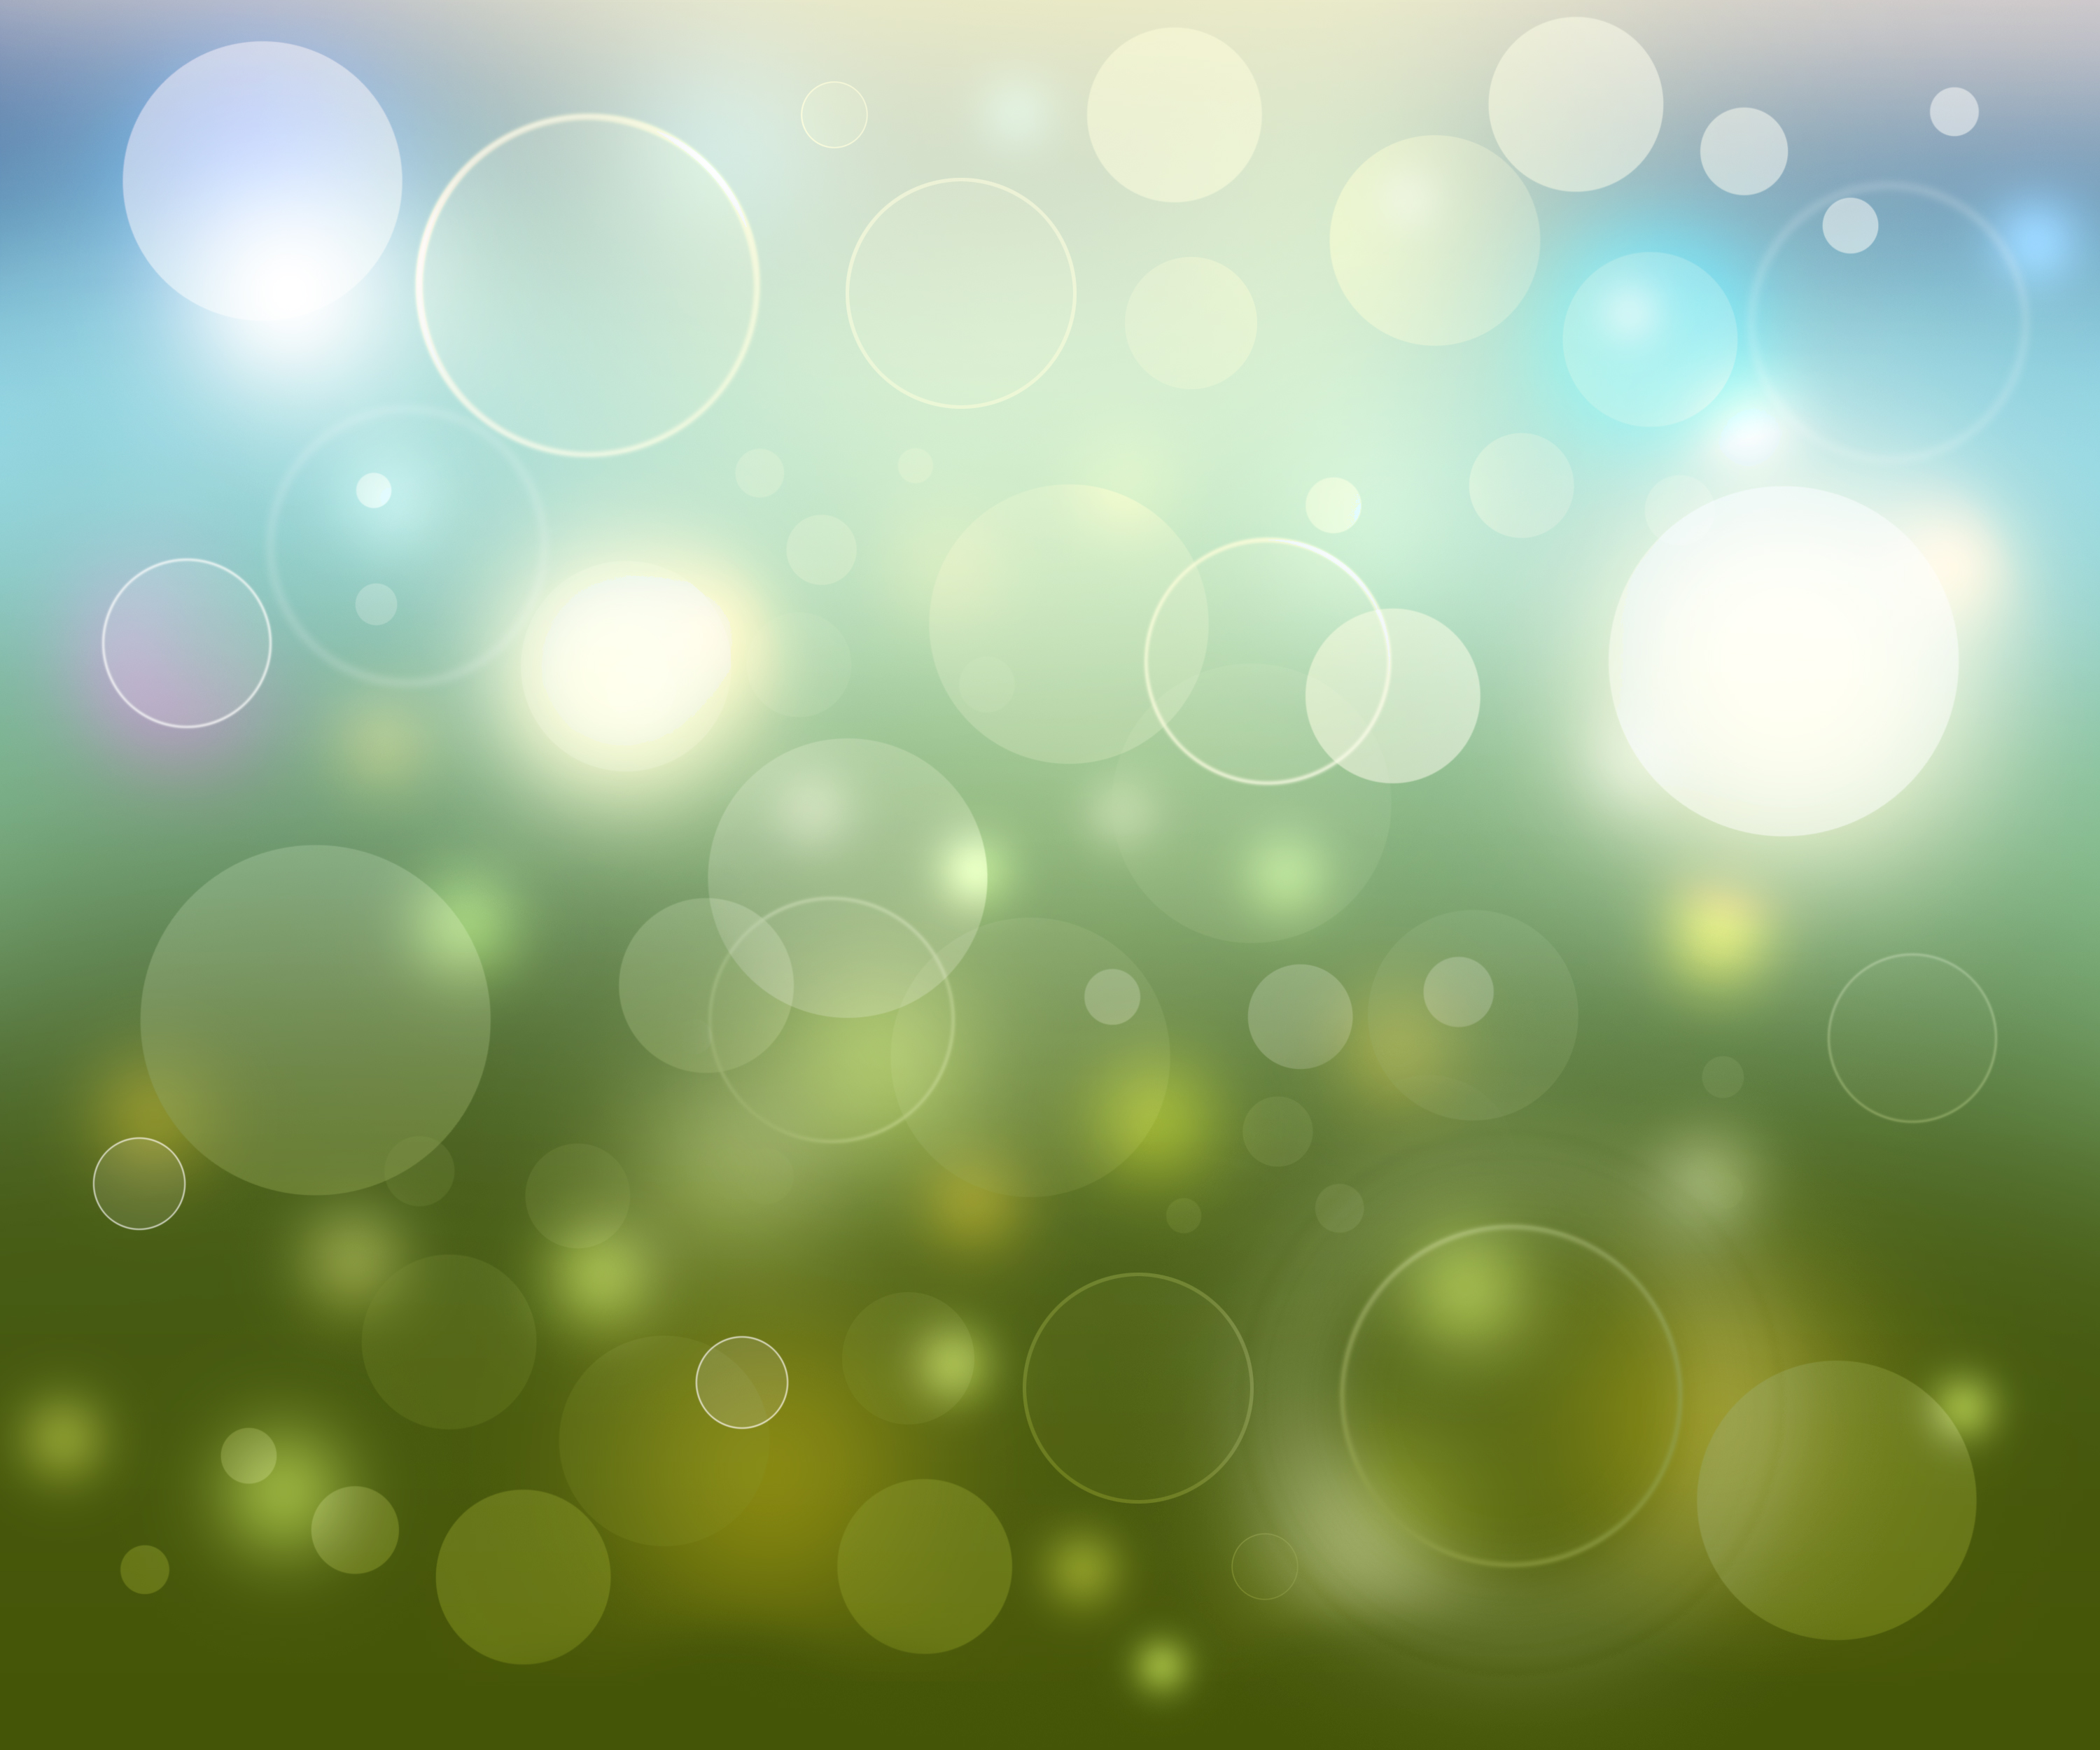 High resolution abstract bokeh background in 3 colors - GraphicsFuel